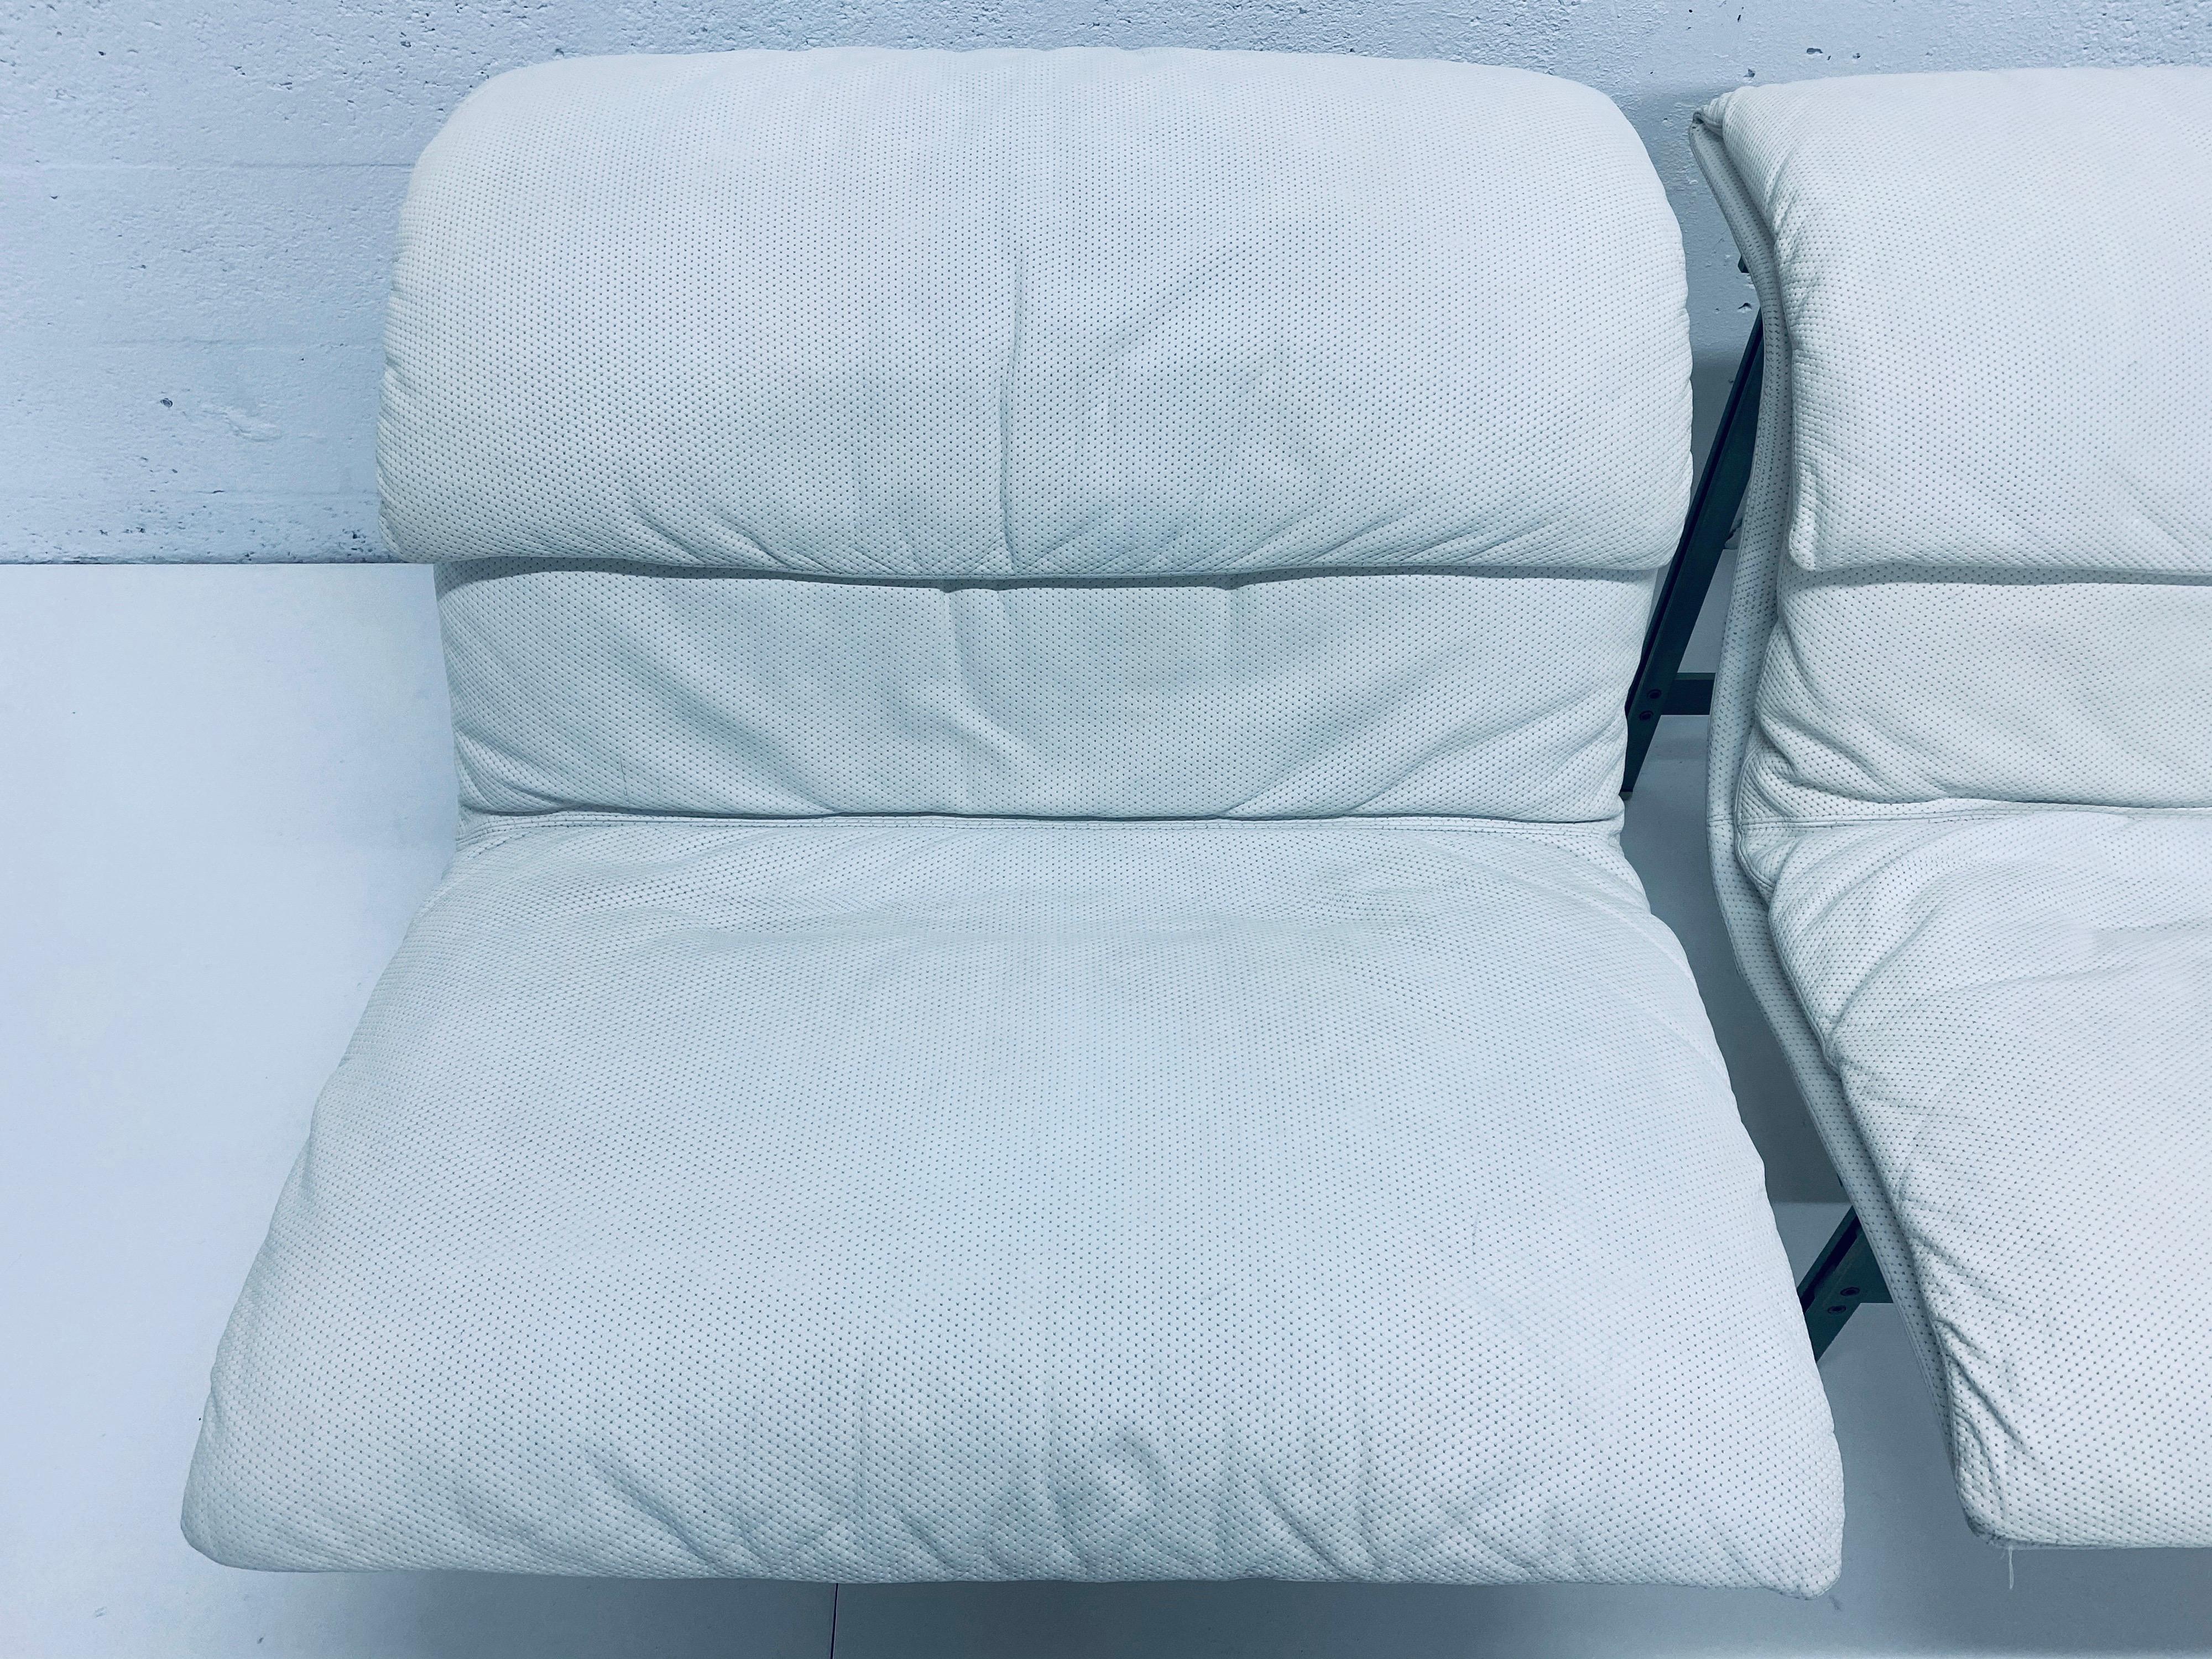 Two perforated white leather Onda wave lounge chairs with original pillows by Giovanni Offredi for Saporiti Italia. Maintains original label.

Leather has been professionally cleaned, whitened and conditioned to bring the leather back as close to